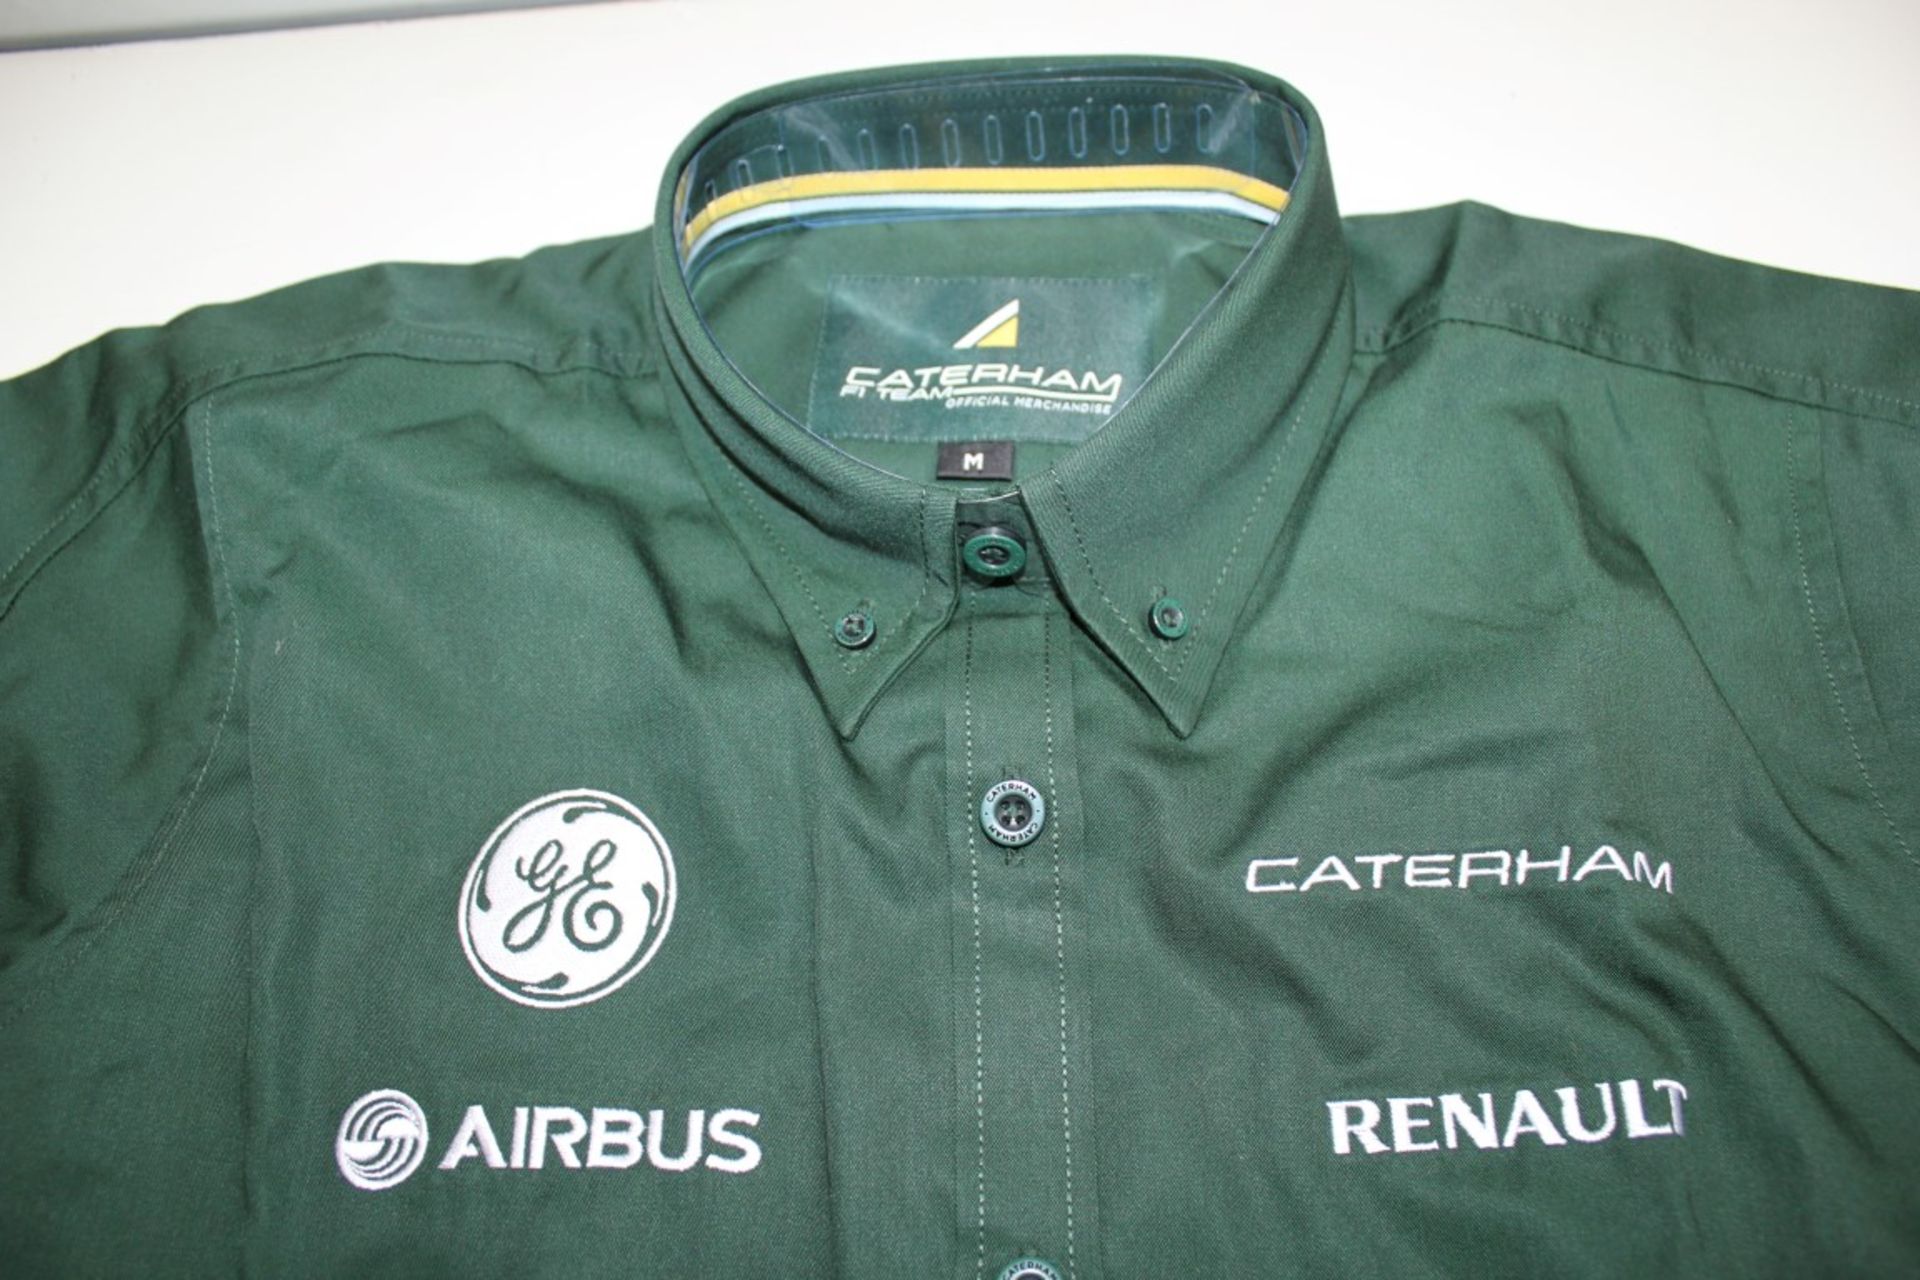 10 x CATERHAM F1 Team Engineer Race Shirts - Short Sleeved - 2 Sizes Supplied: 2 x Small & 8 x - Image 2 of 3